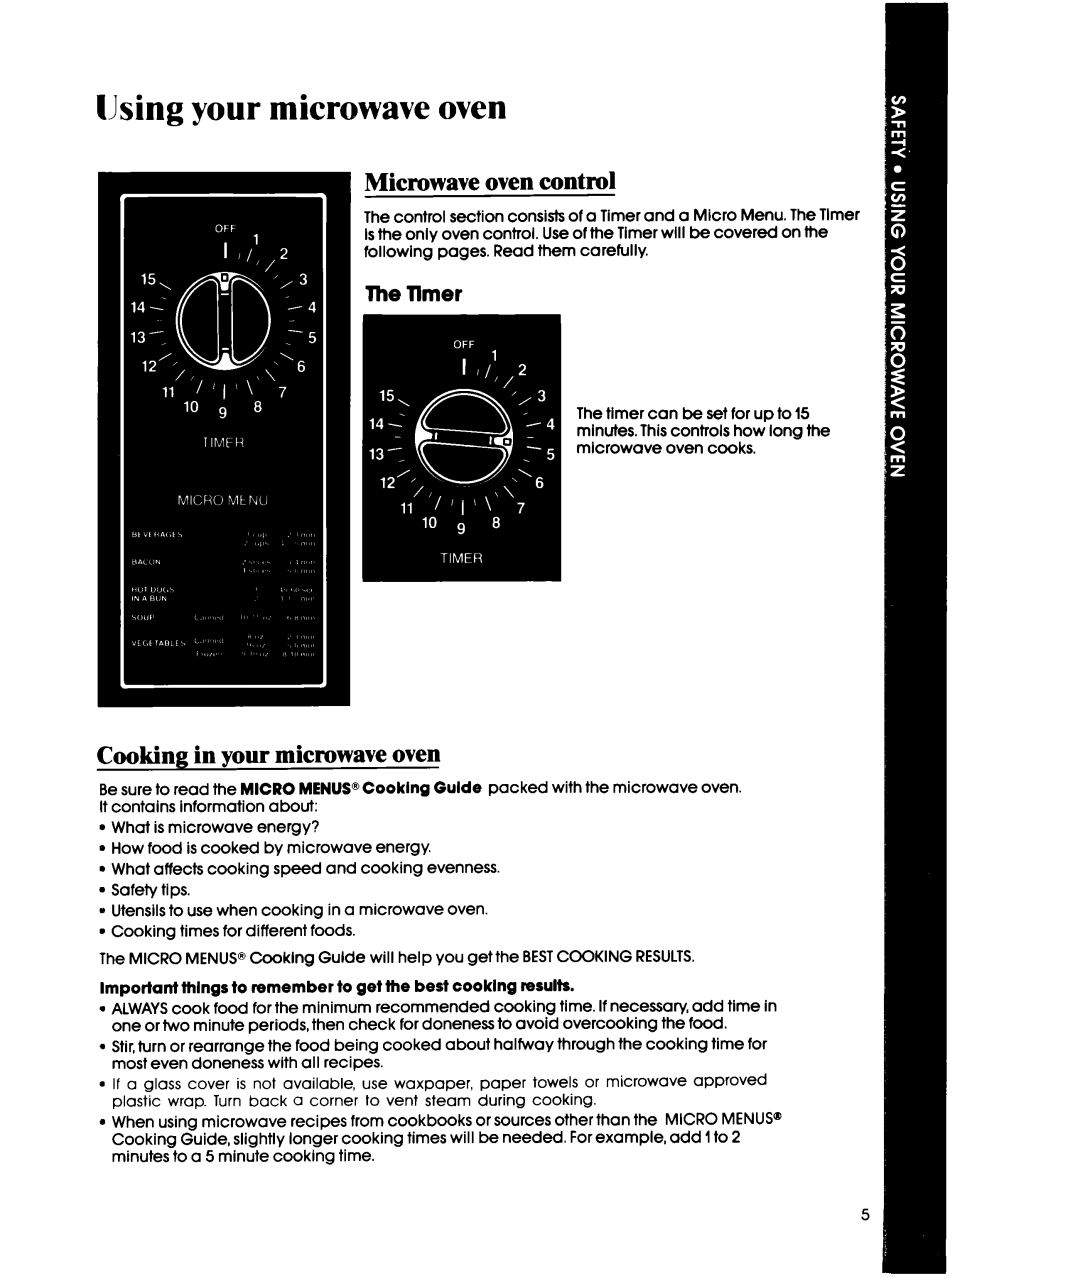 Whirlpool MWIOOOXW manual llsing your microwave oven, Microwave oven control, Cooking in your microwave oven, The llmer 